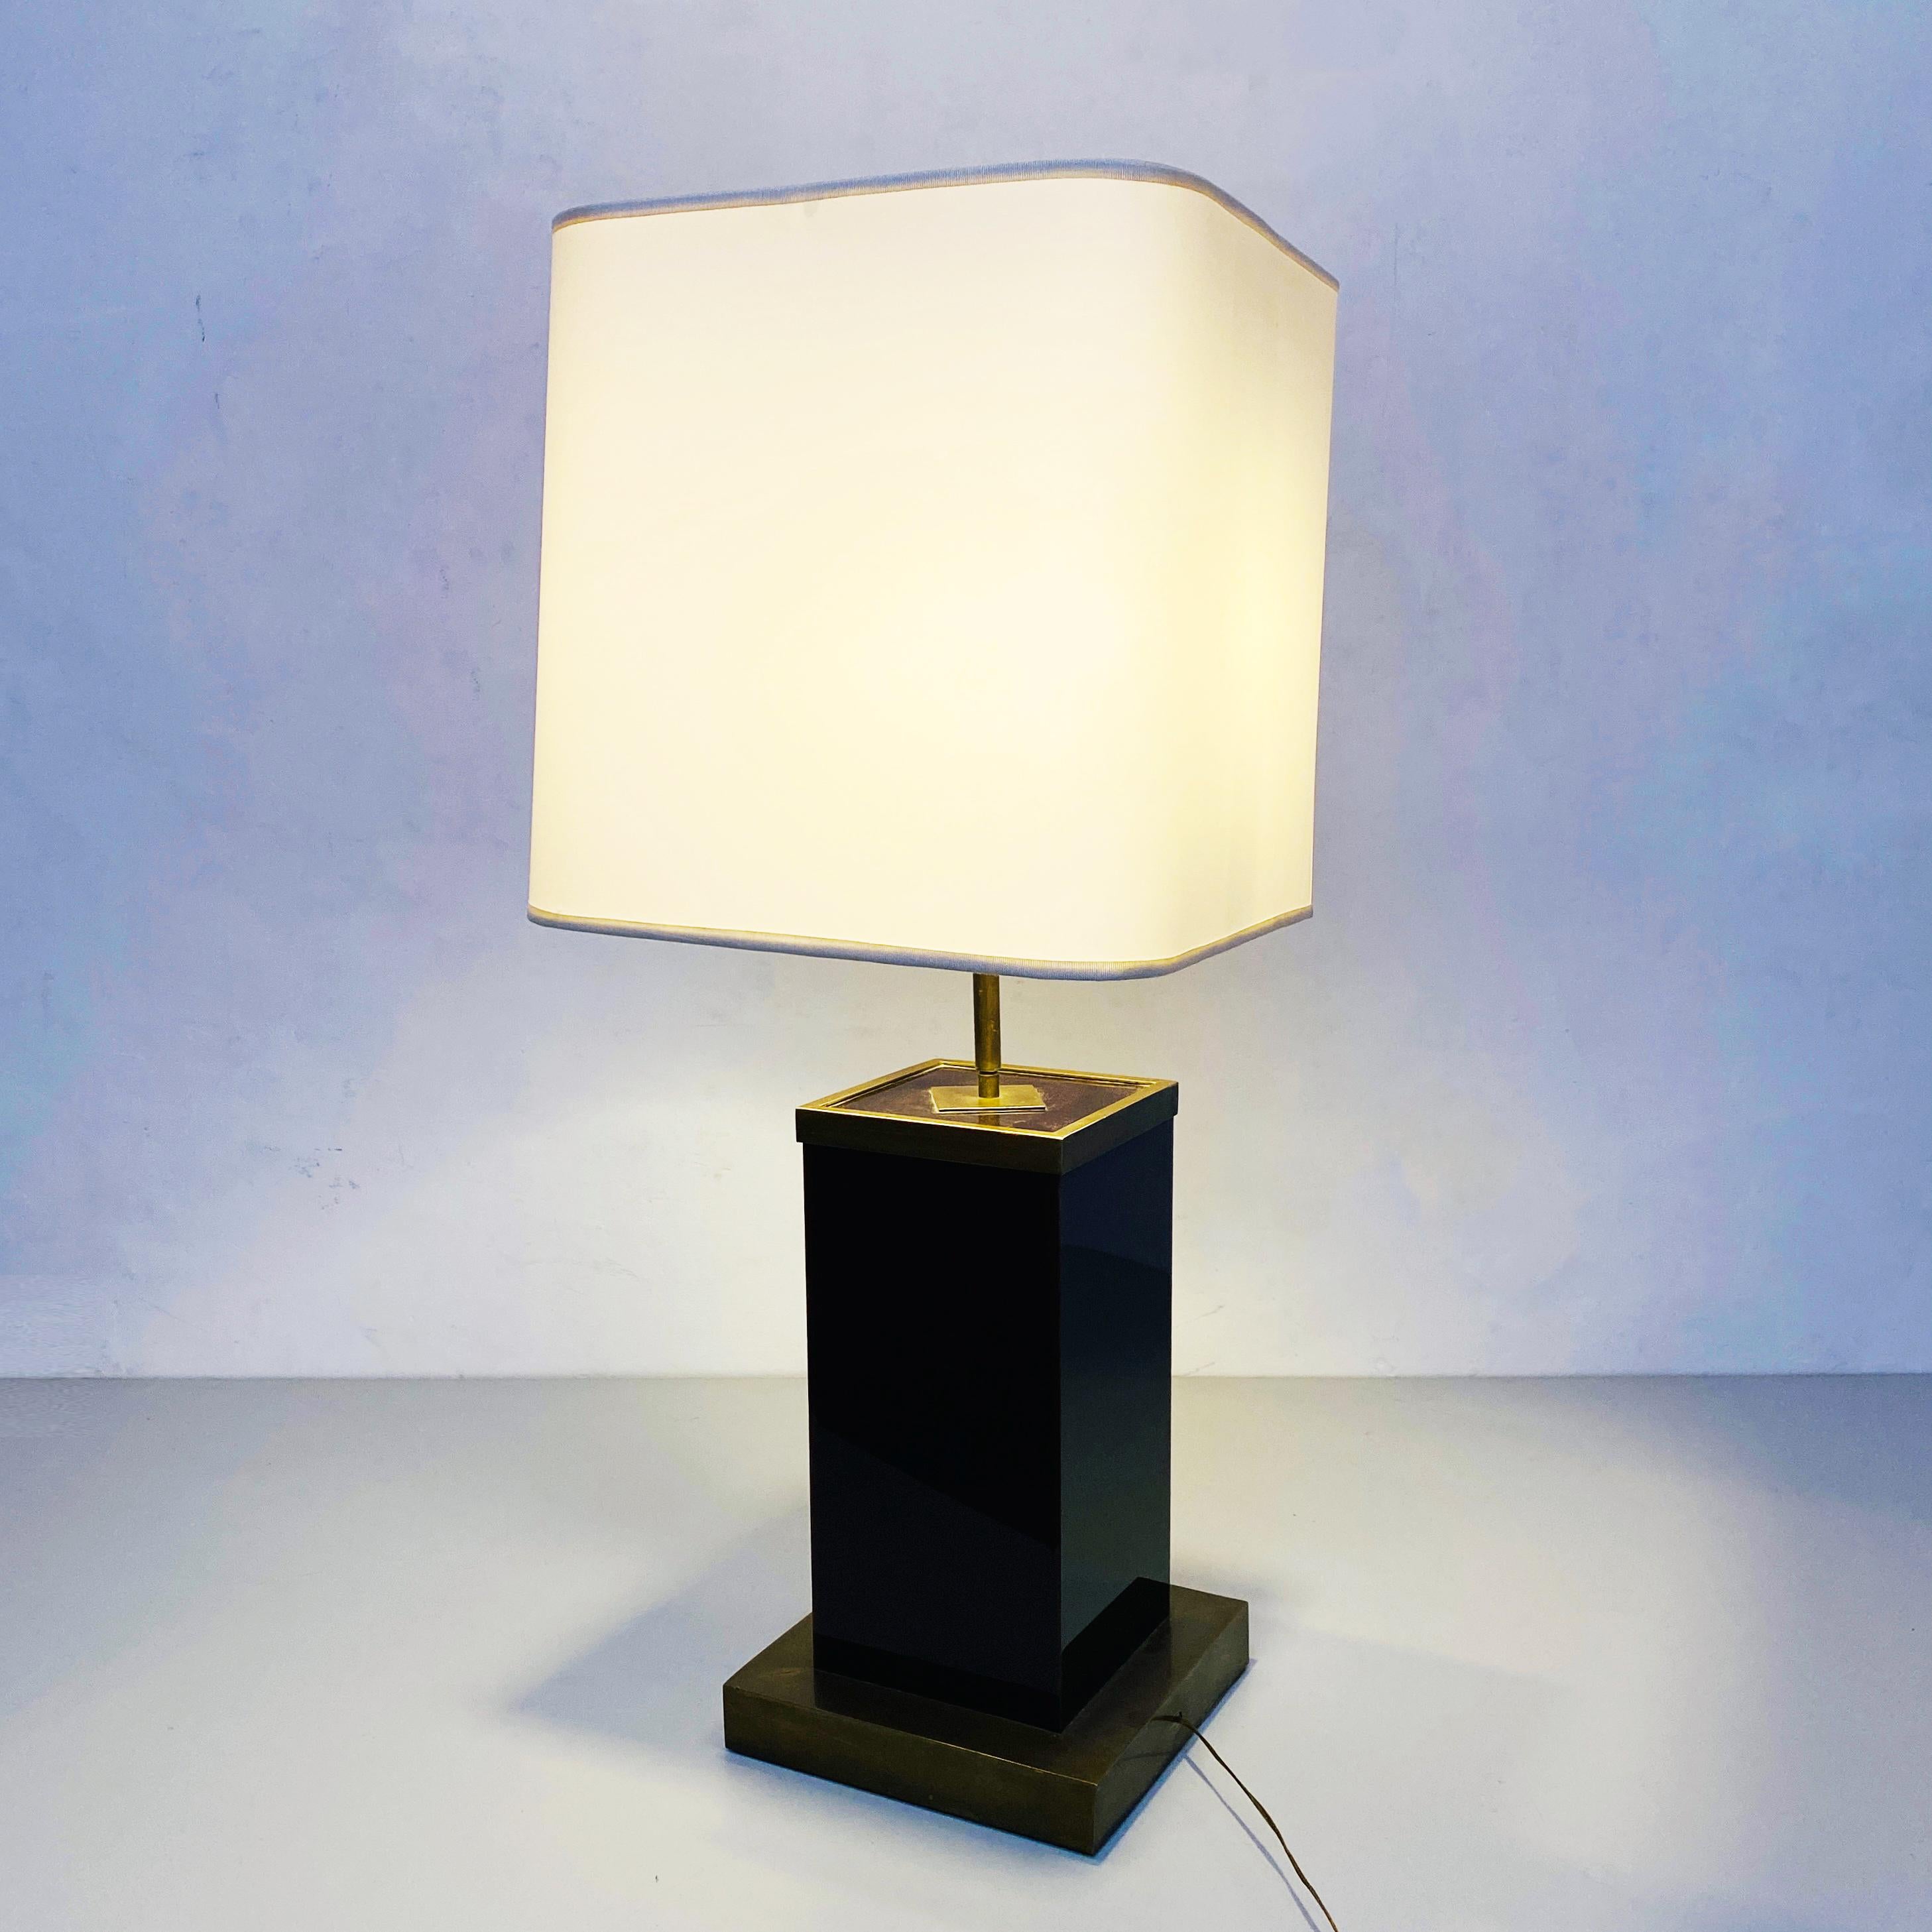 Italian Mid-Century Brown Plexiglass, White Fabric and Brass Table Lamp, 1970s For Sale 1